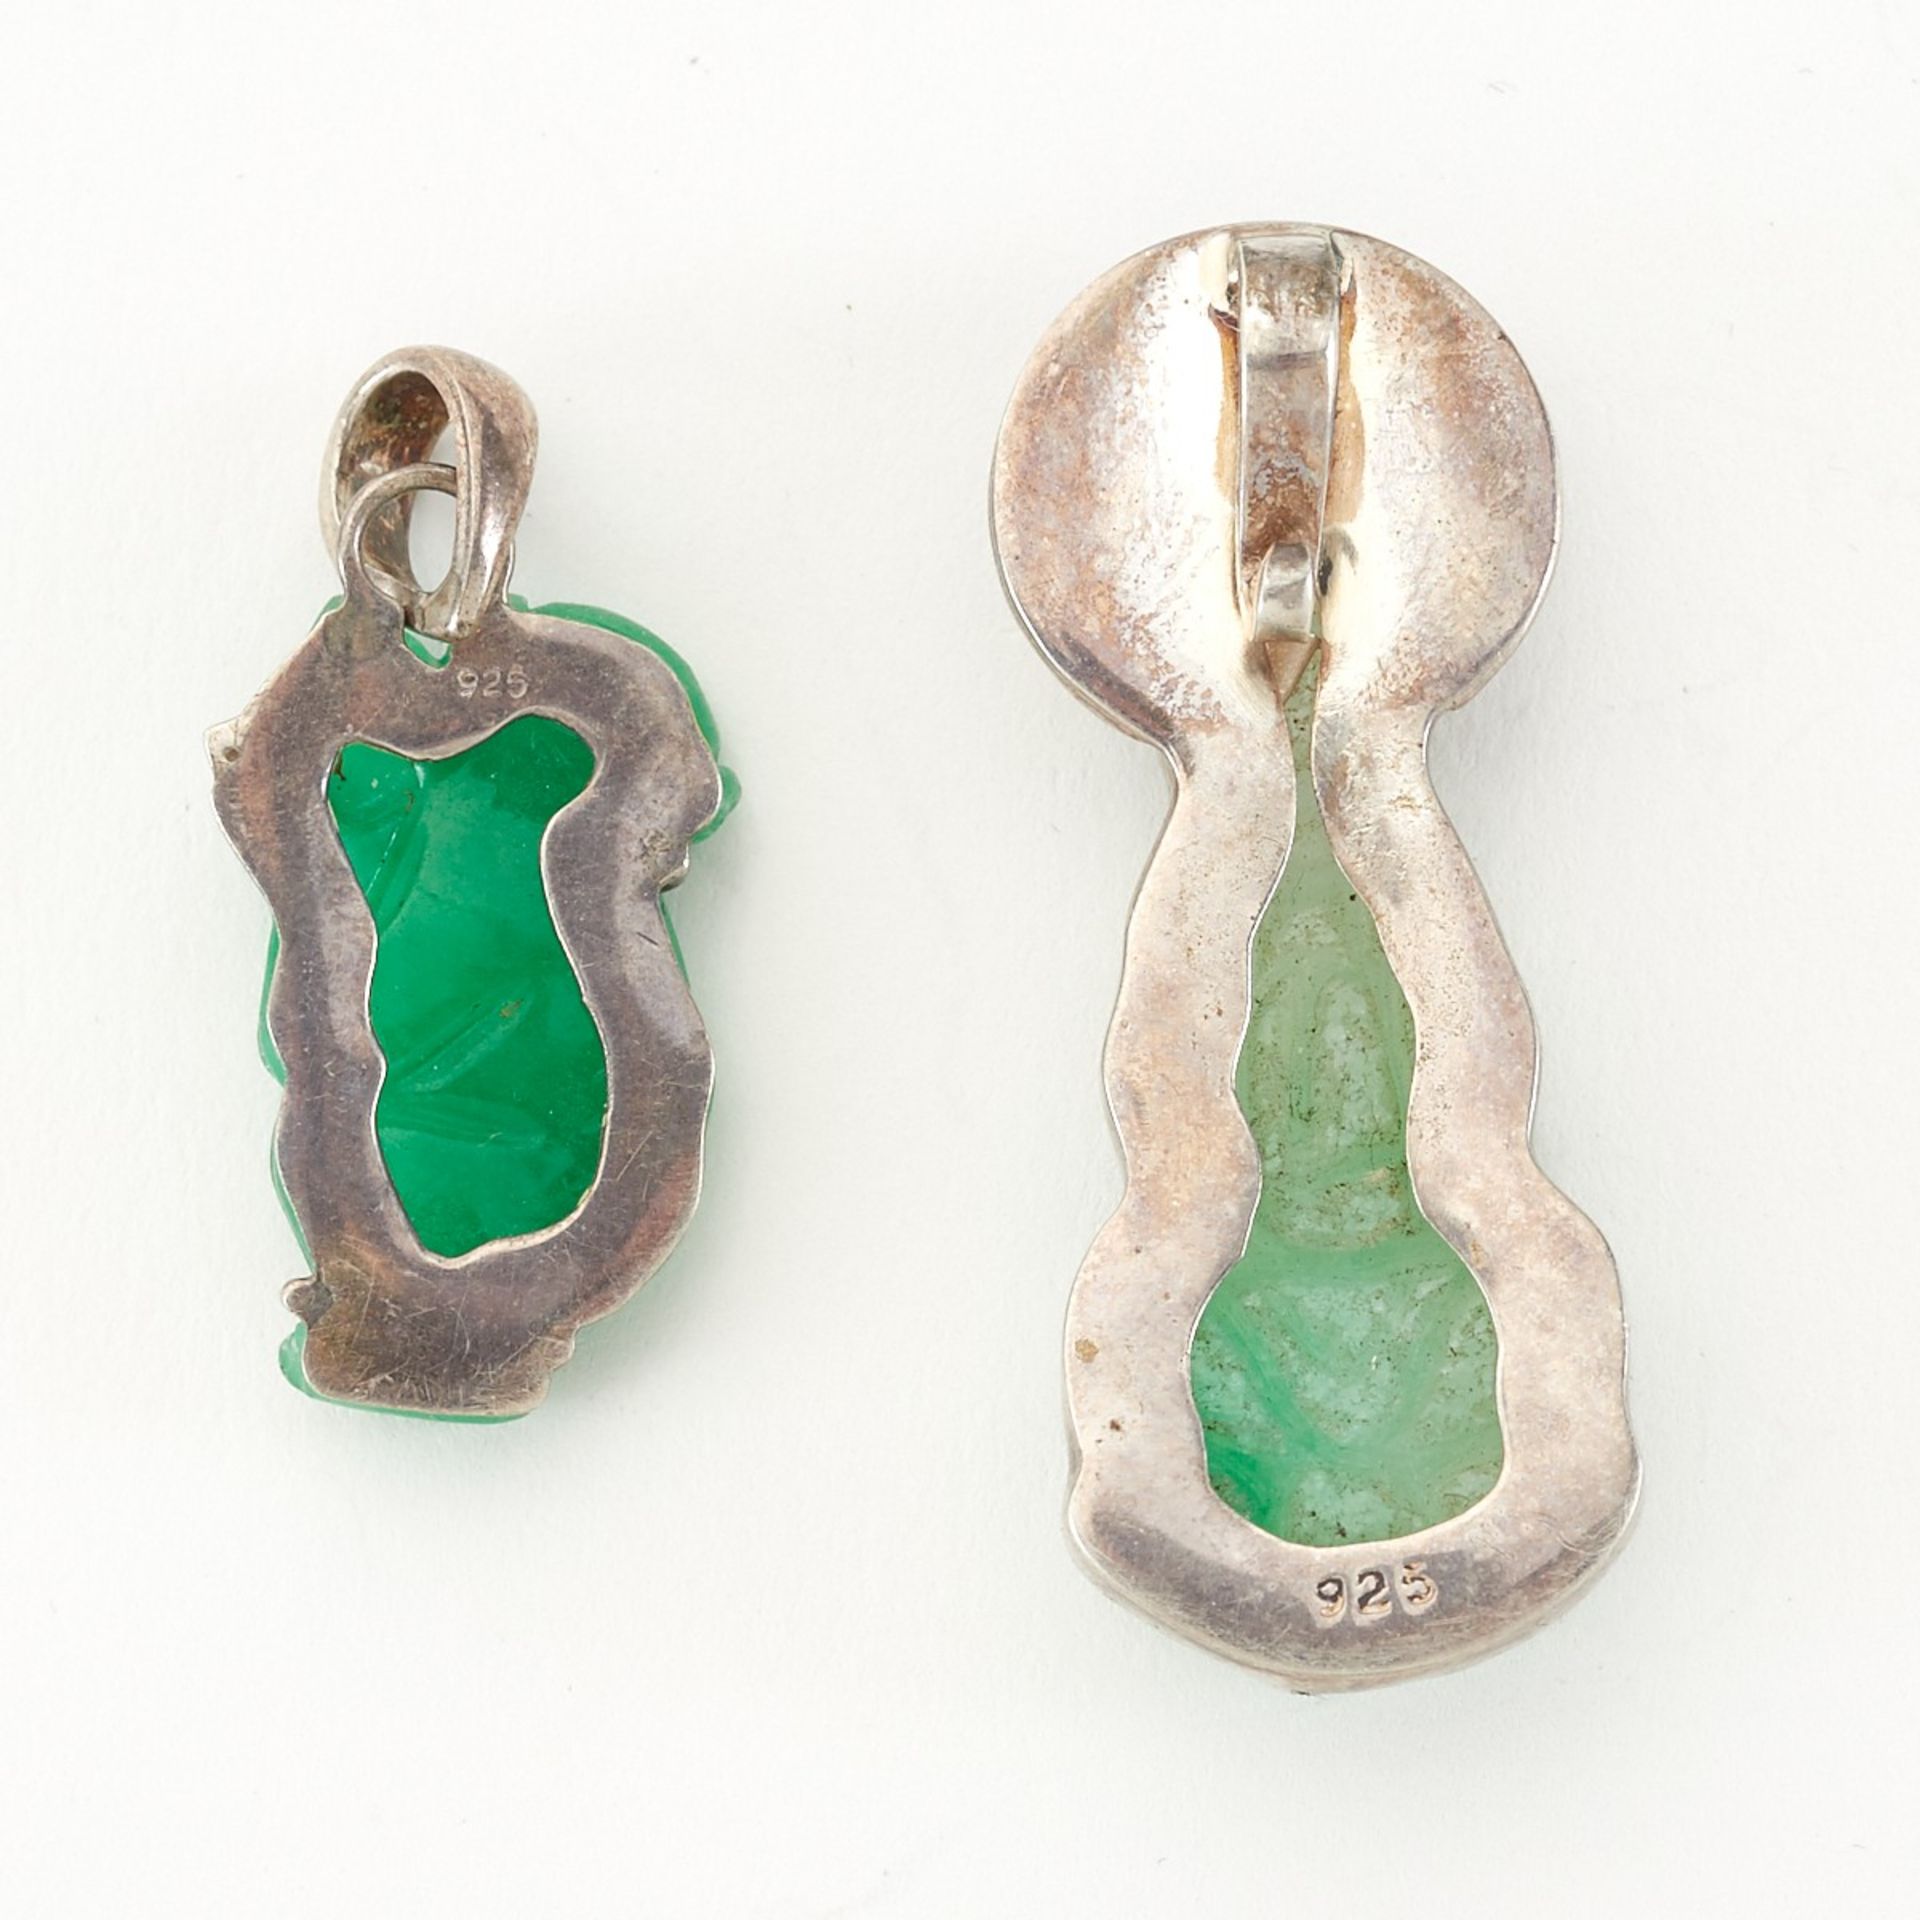 2 Chinese Sterling Mounted Carved Stones Jade - Image 2 of 4